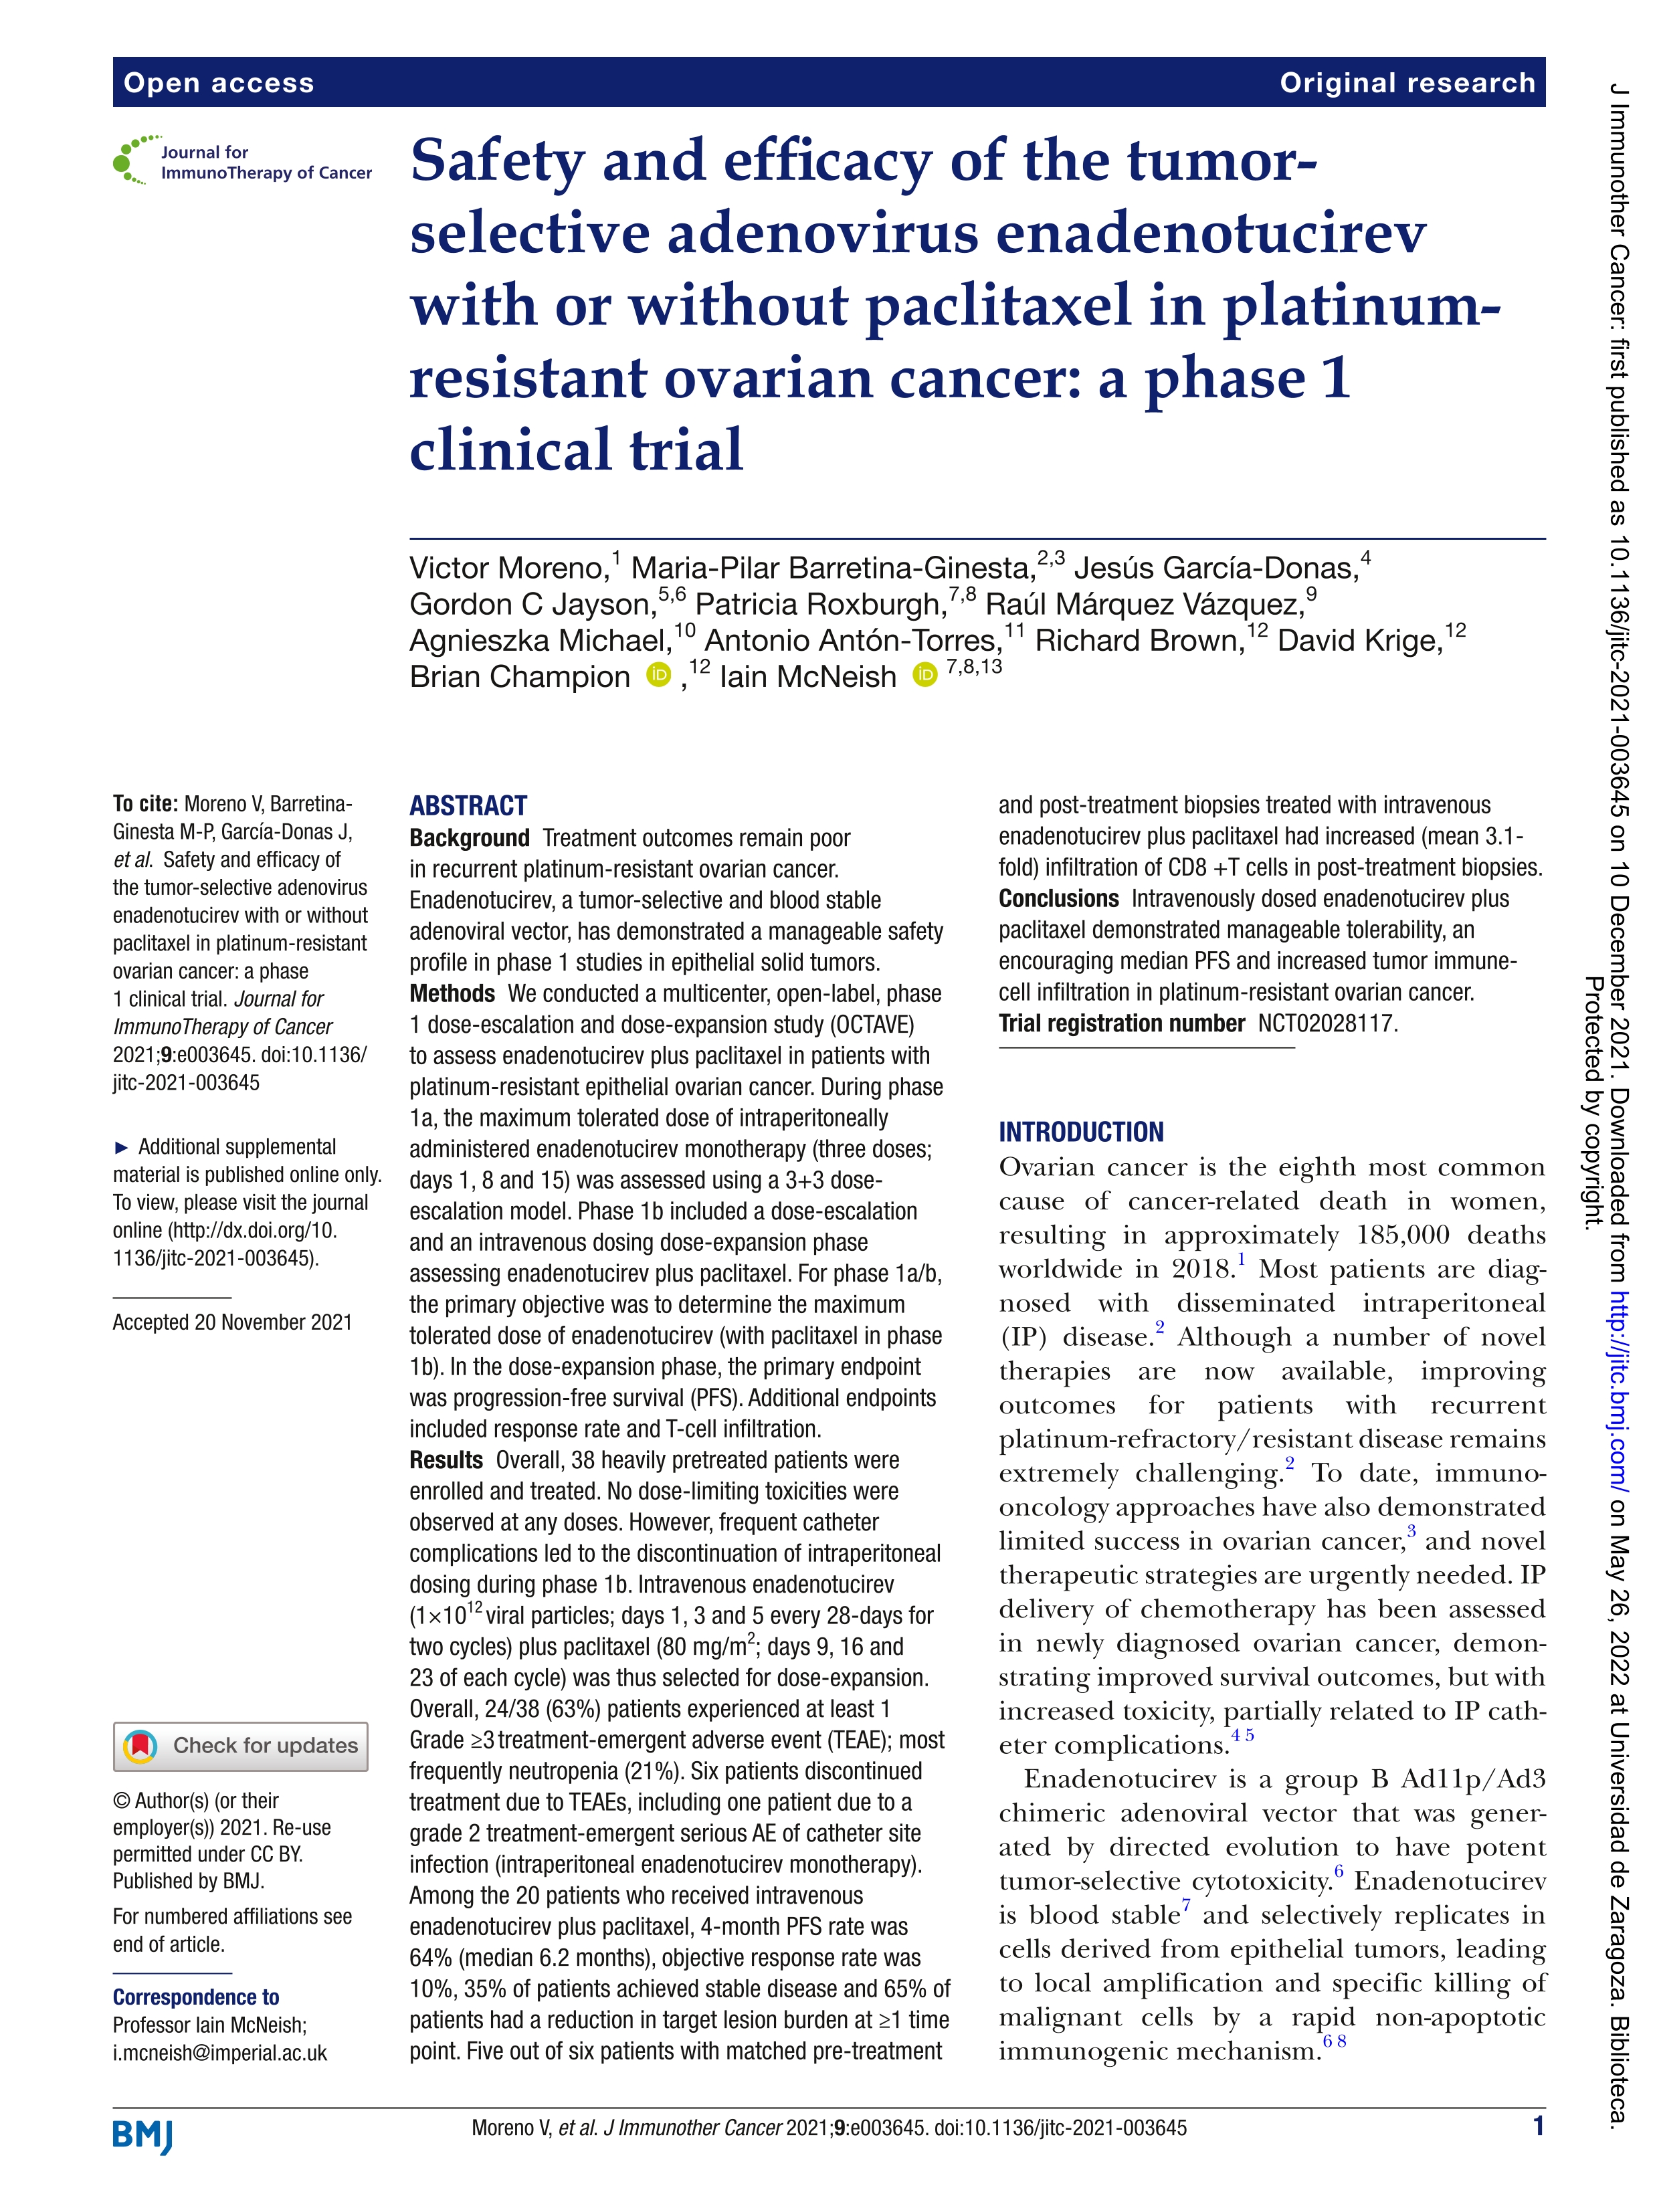 Safety and efficacy of the tumor-selective adenovirus enadenotucirev with or without paclitaxel in platinum-resistant ovarian cancer: A phase 1 clinical trial